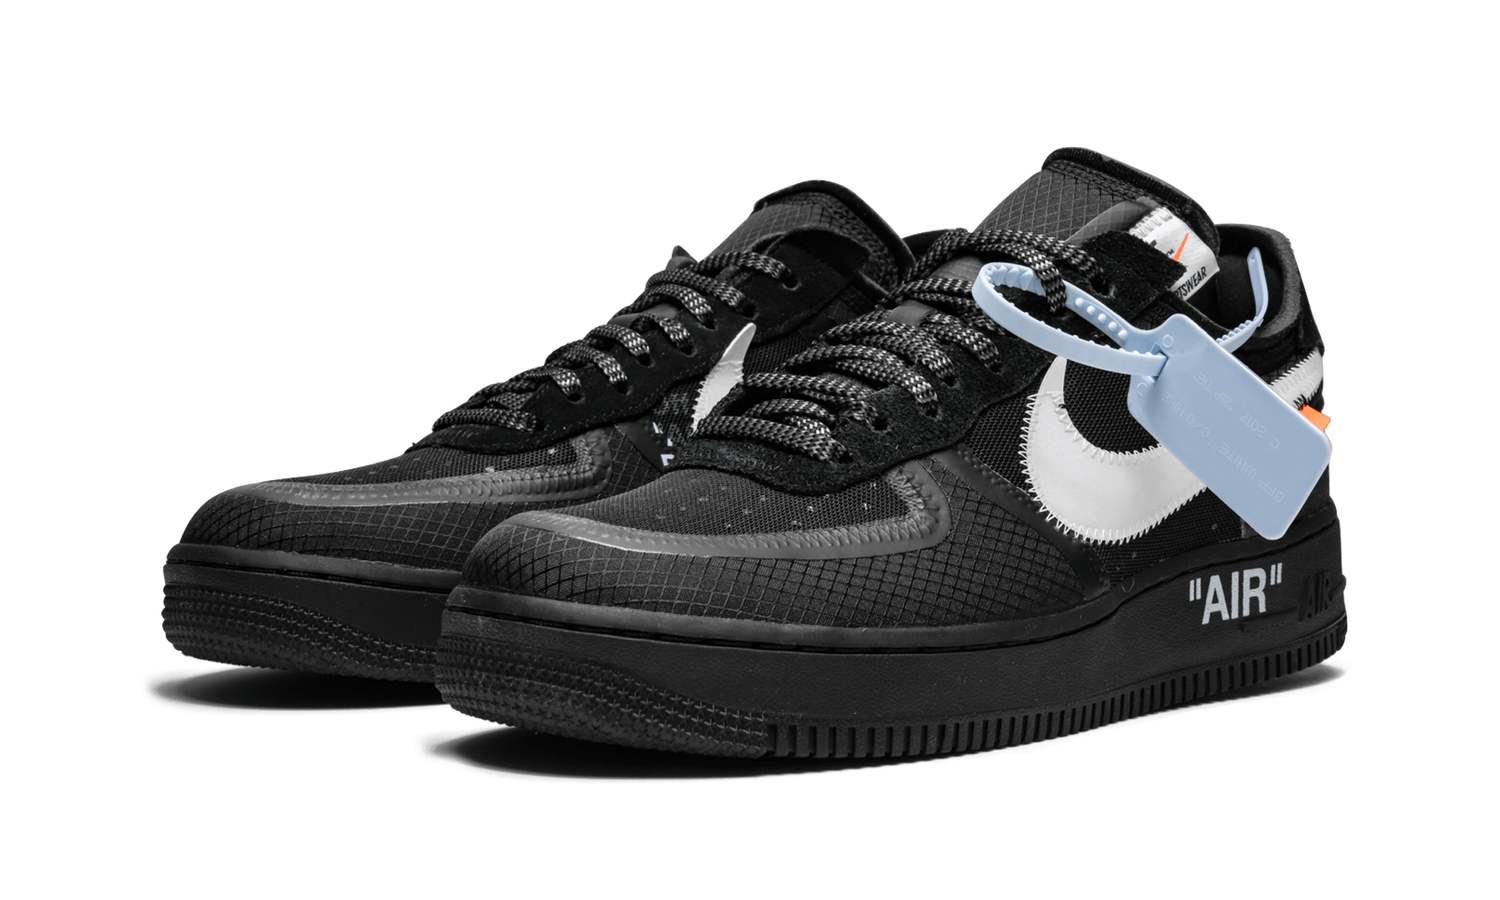 The 10: Nike Air Force 1 Low “Off-White Black” - AO4606 001 | Grailshop